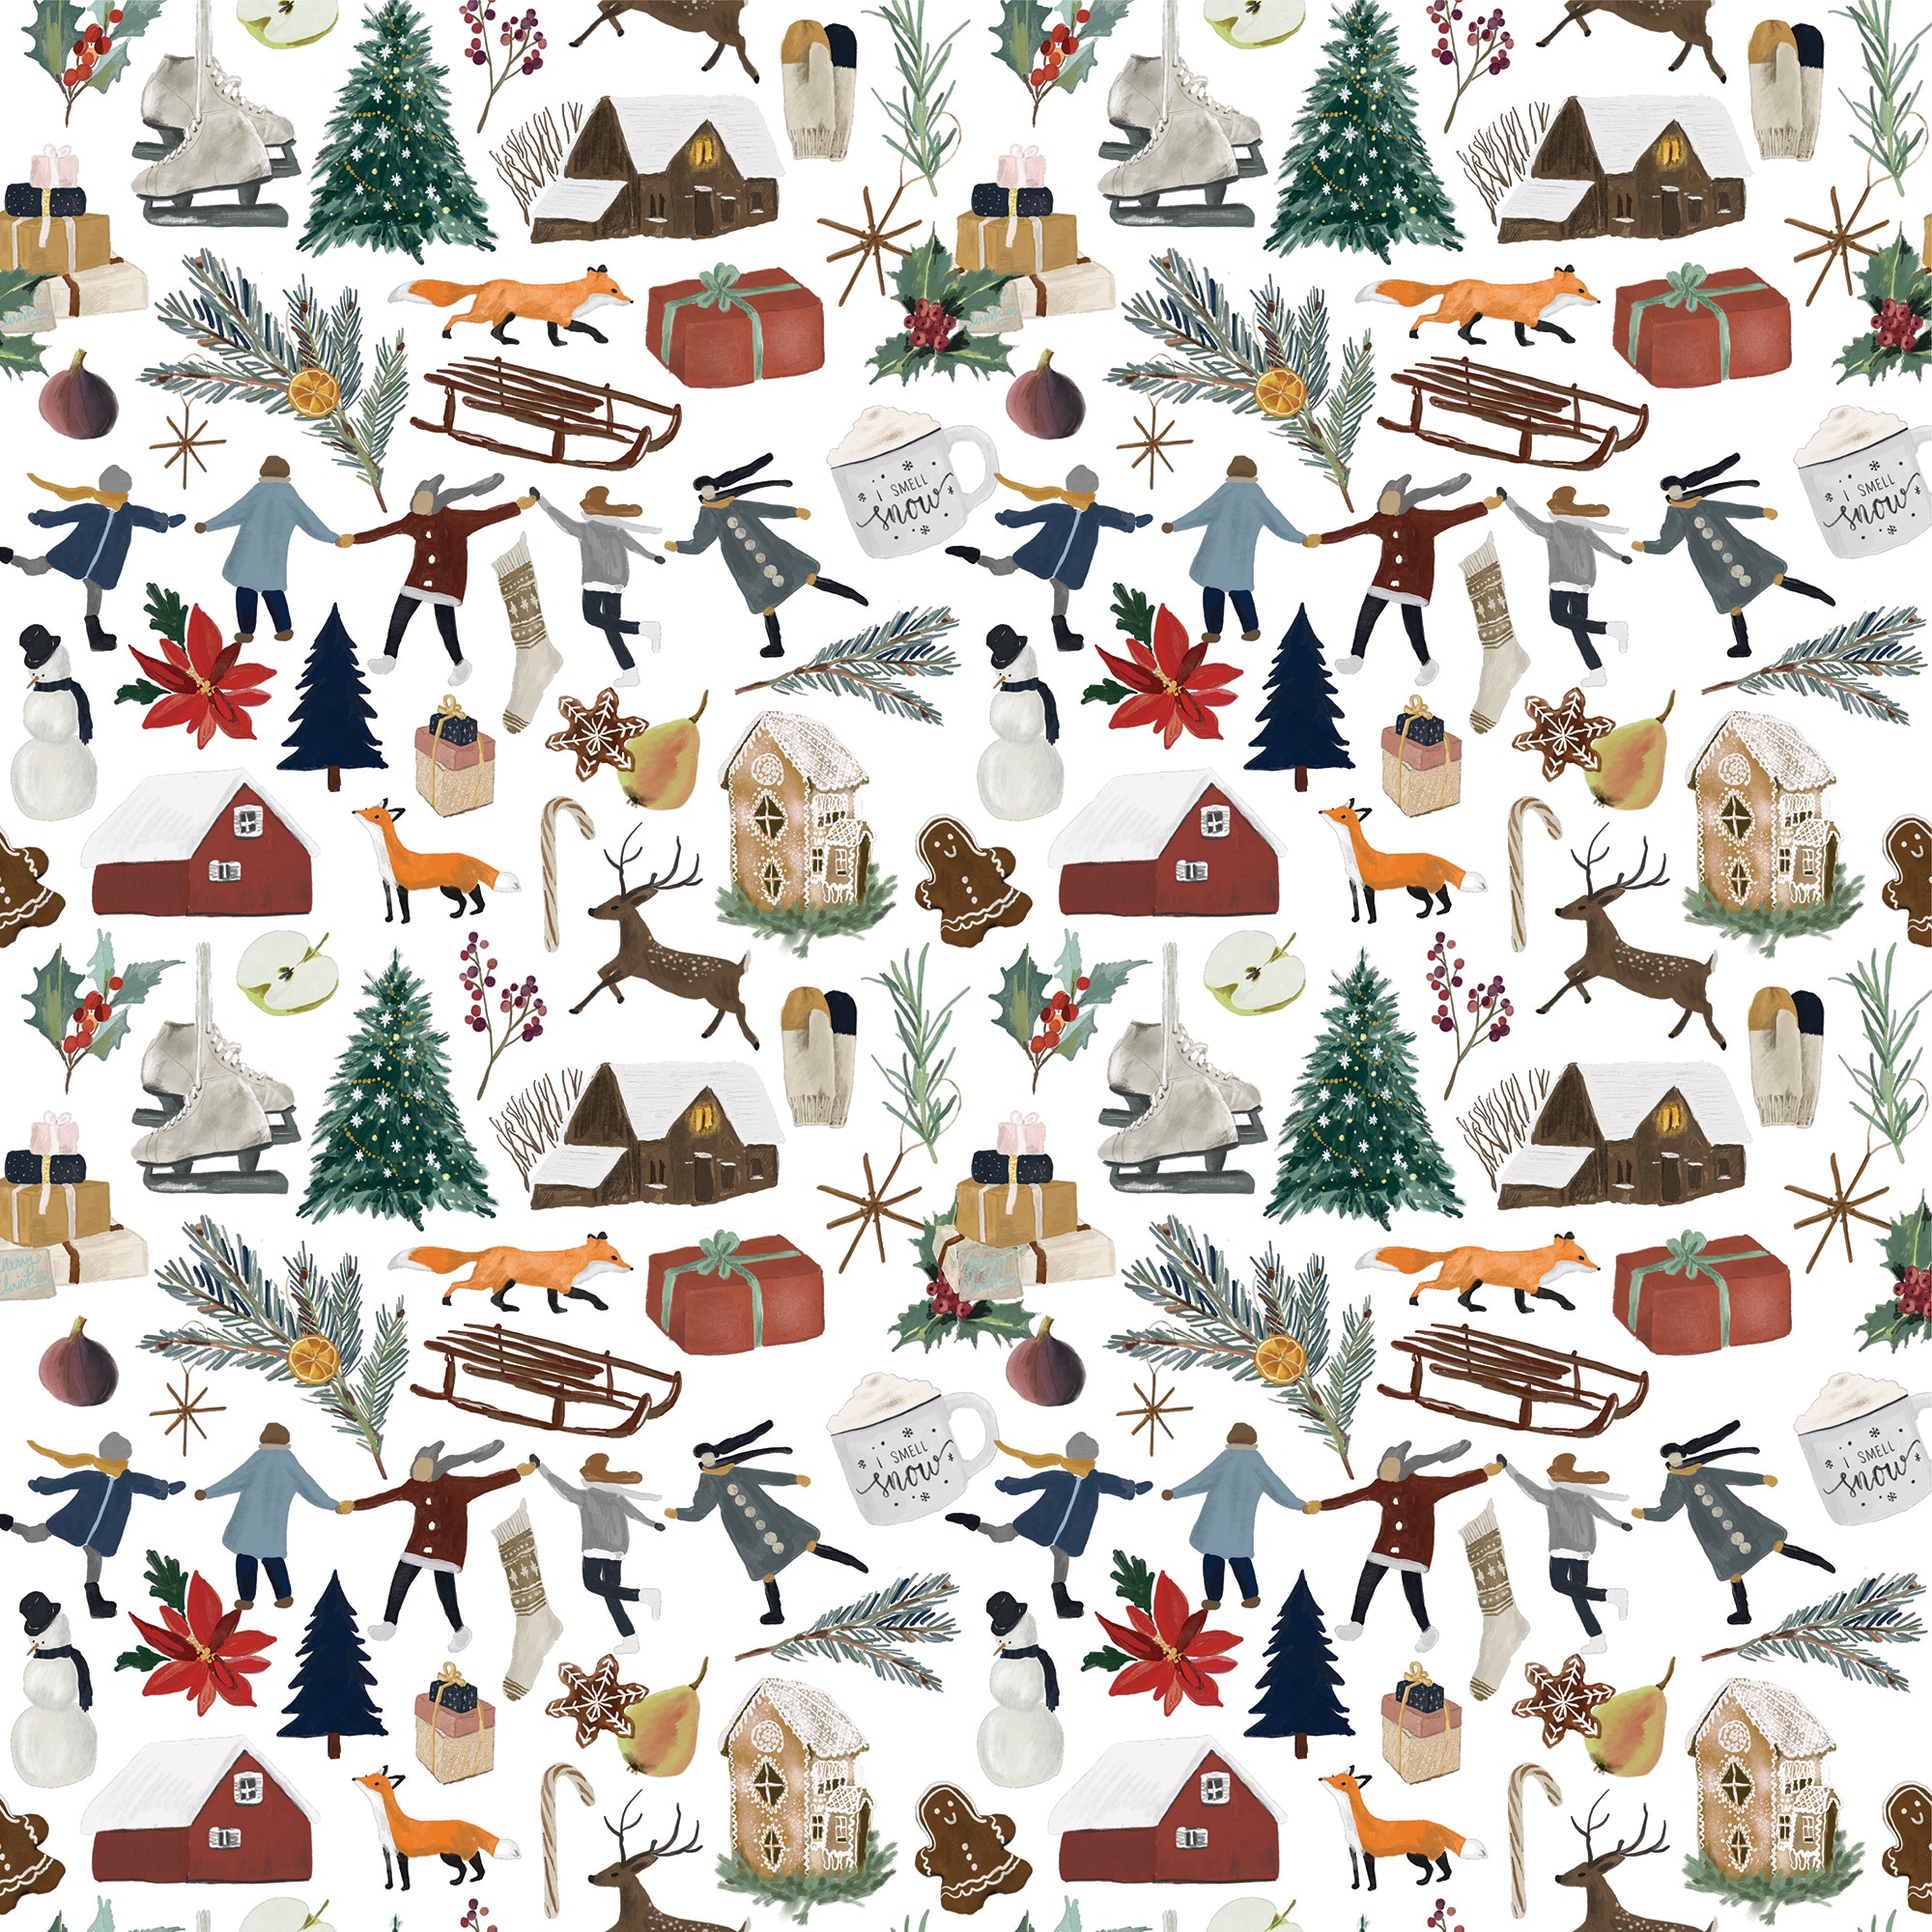 Christmas Tree Gfit Wrap  Vintage Christmas Wrapping Paper - Waterleaf  Paper Company